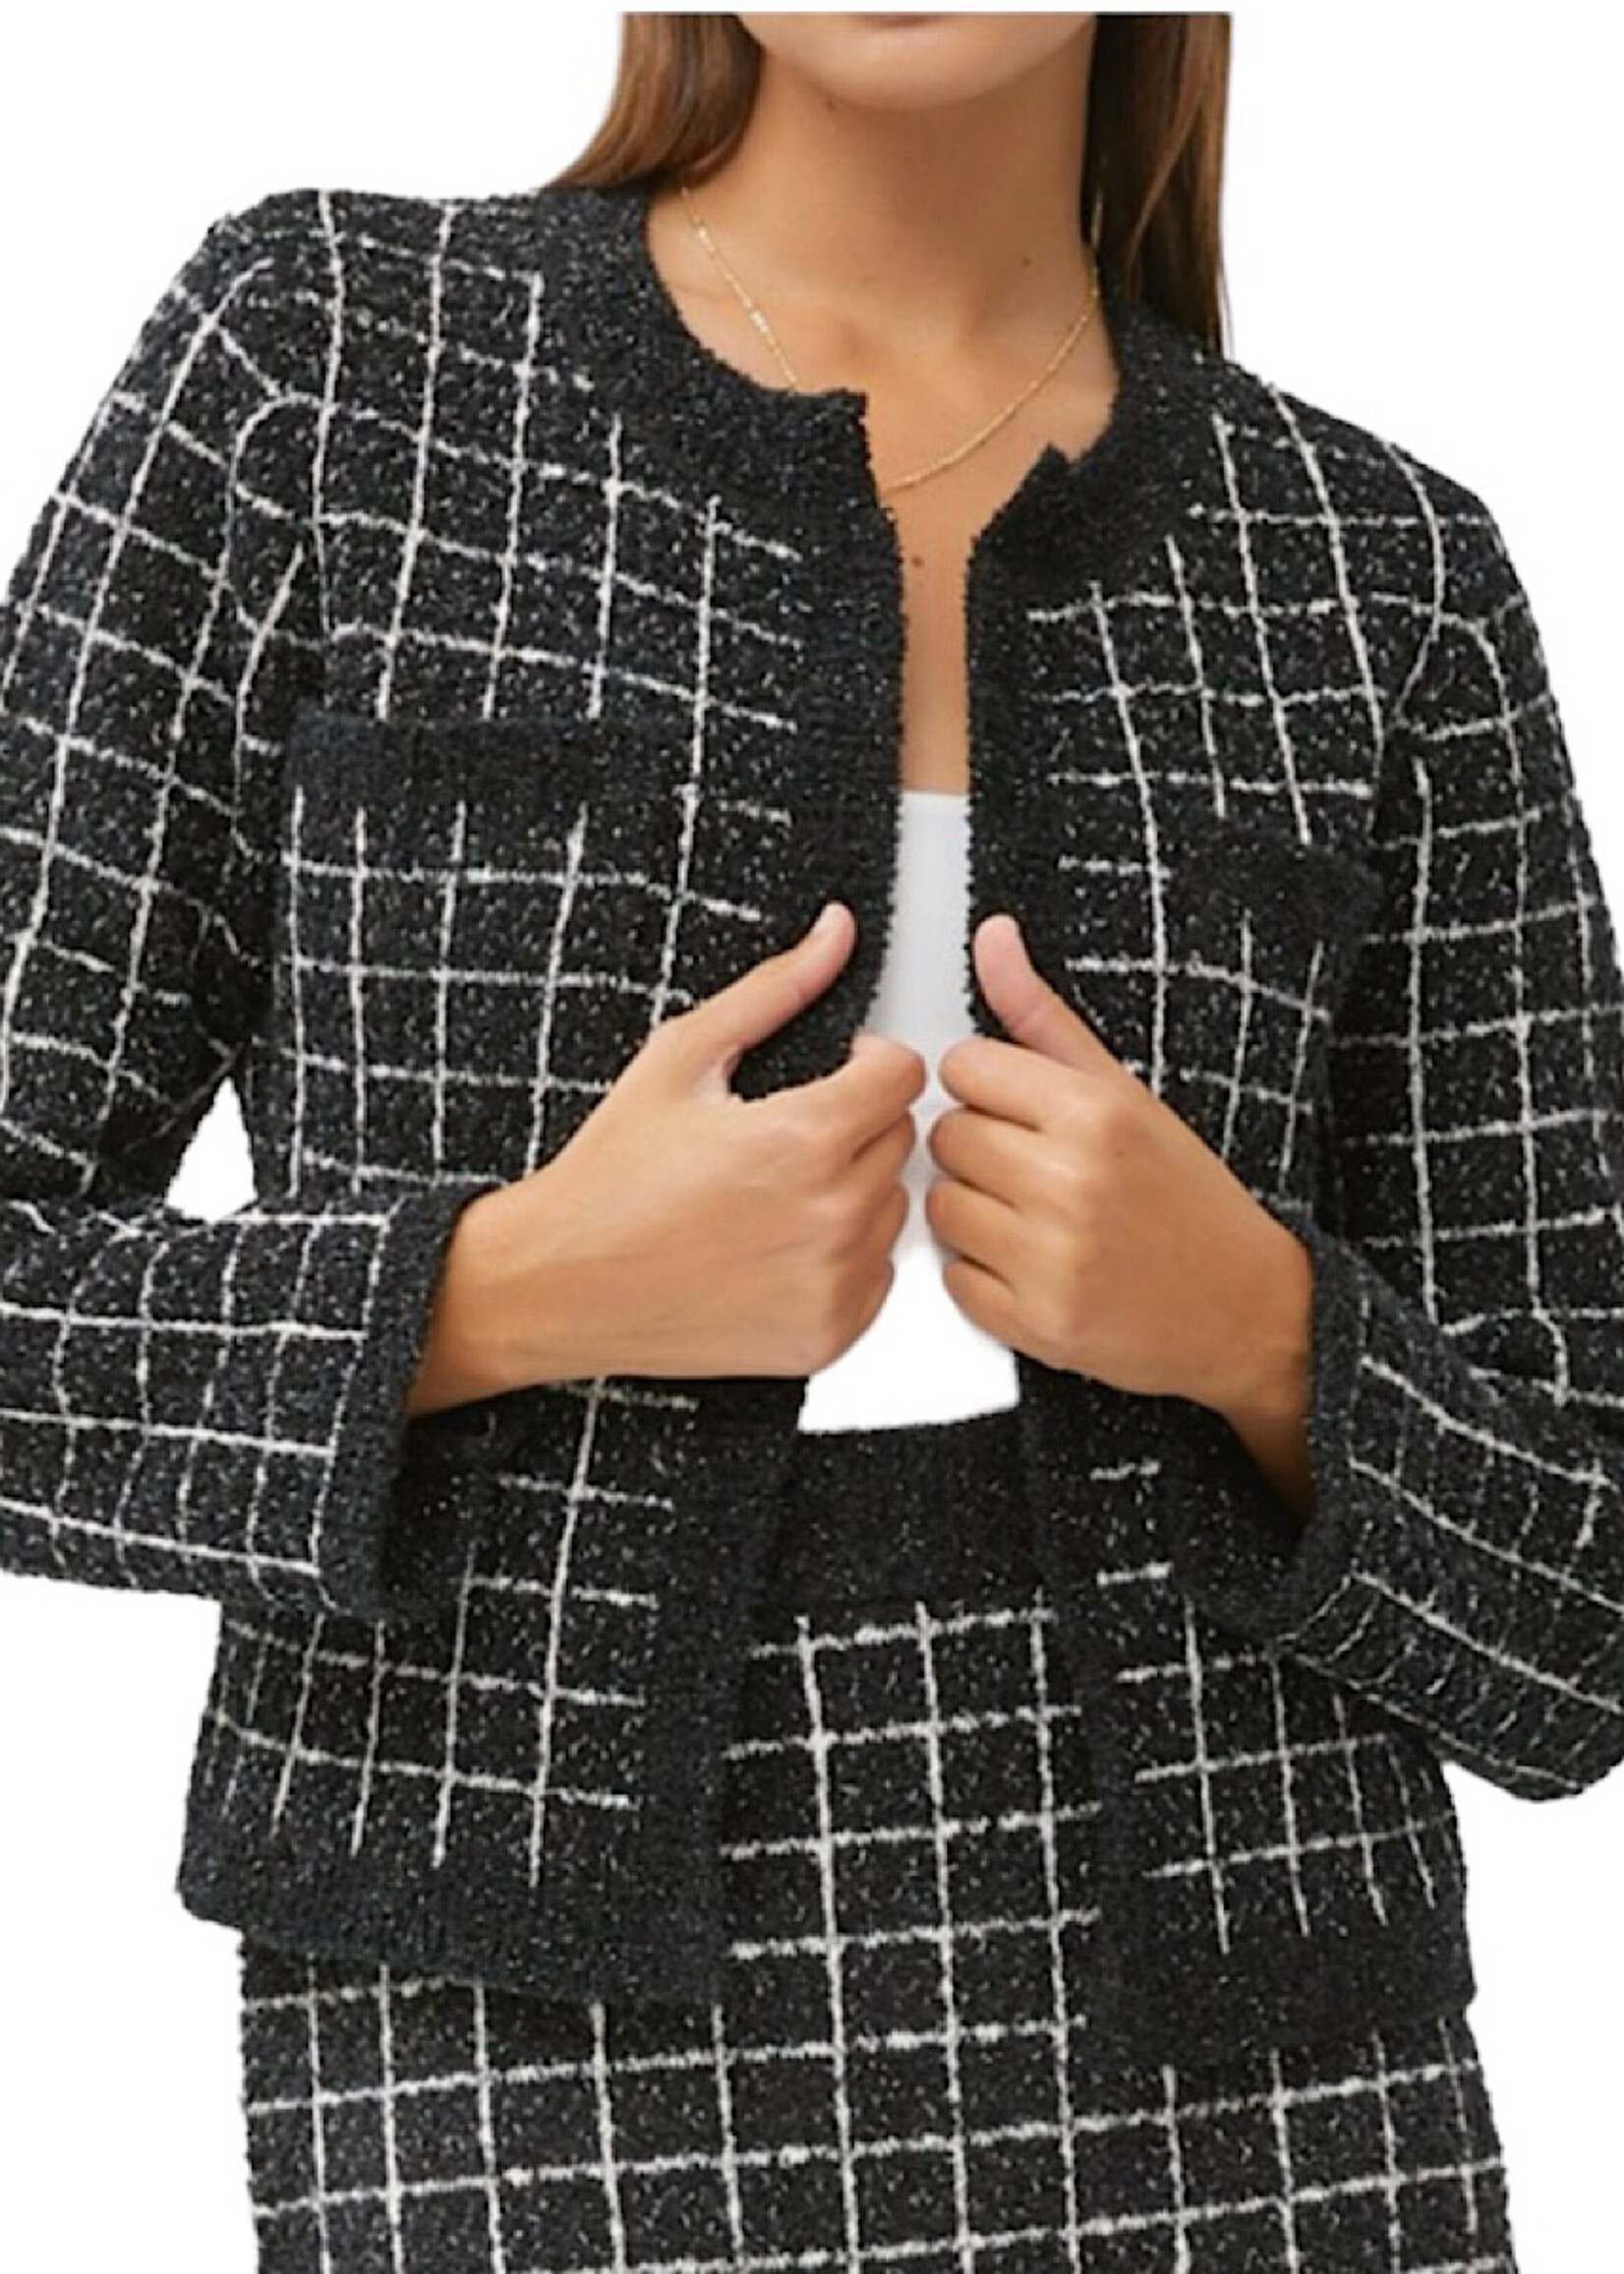 Black and White Cropped Sweater Jacket